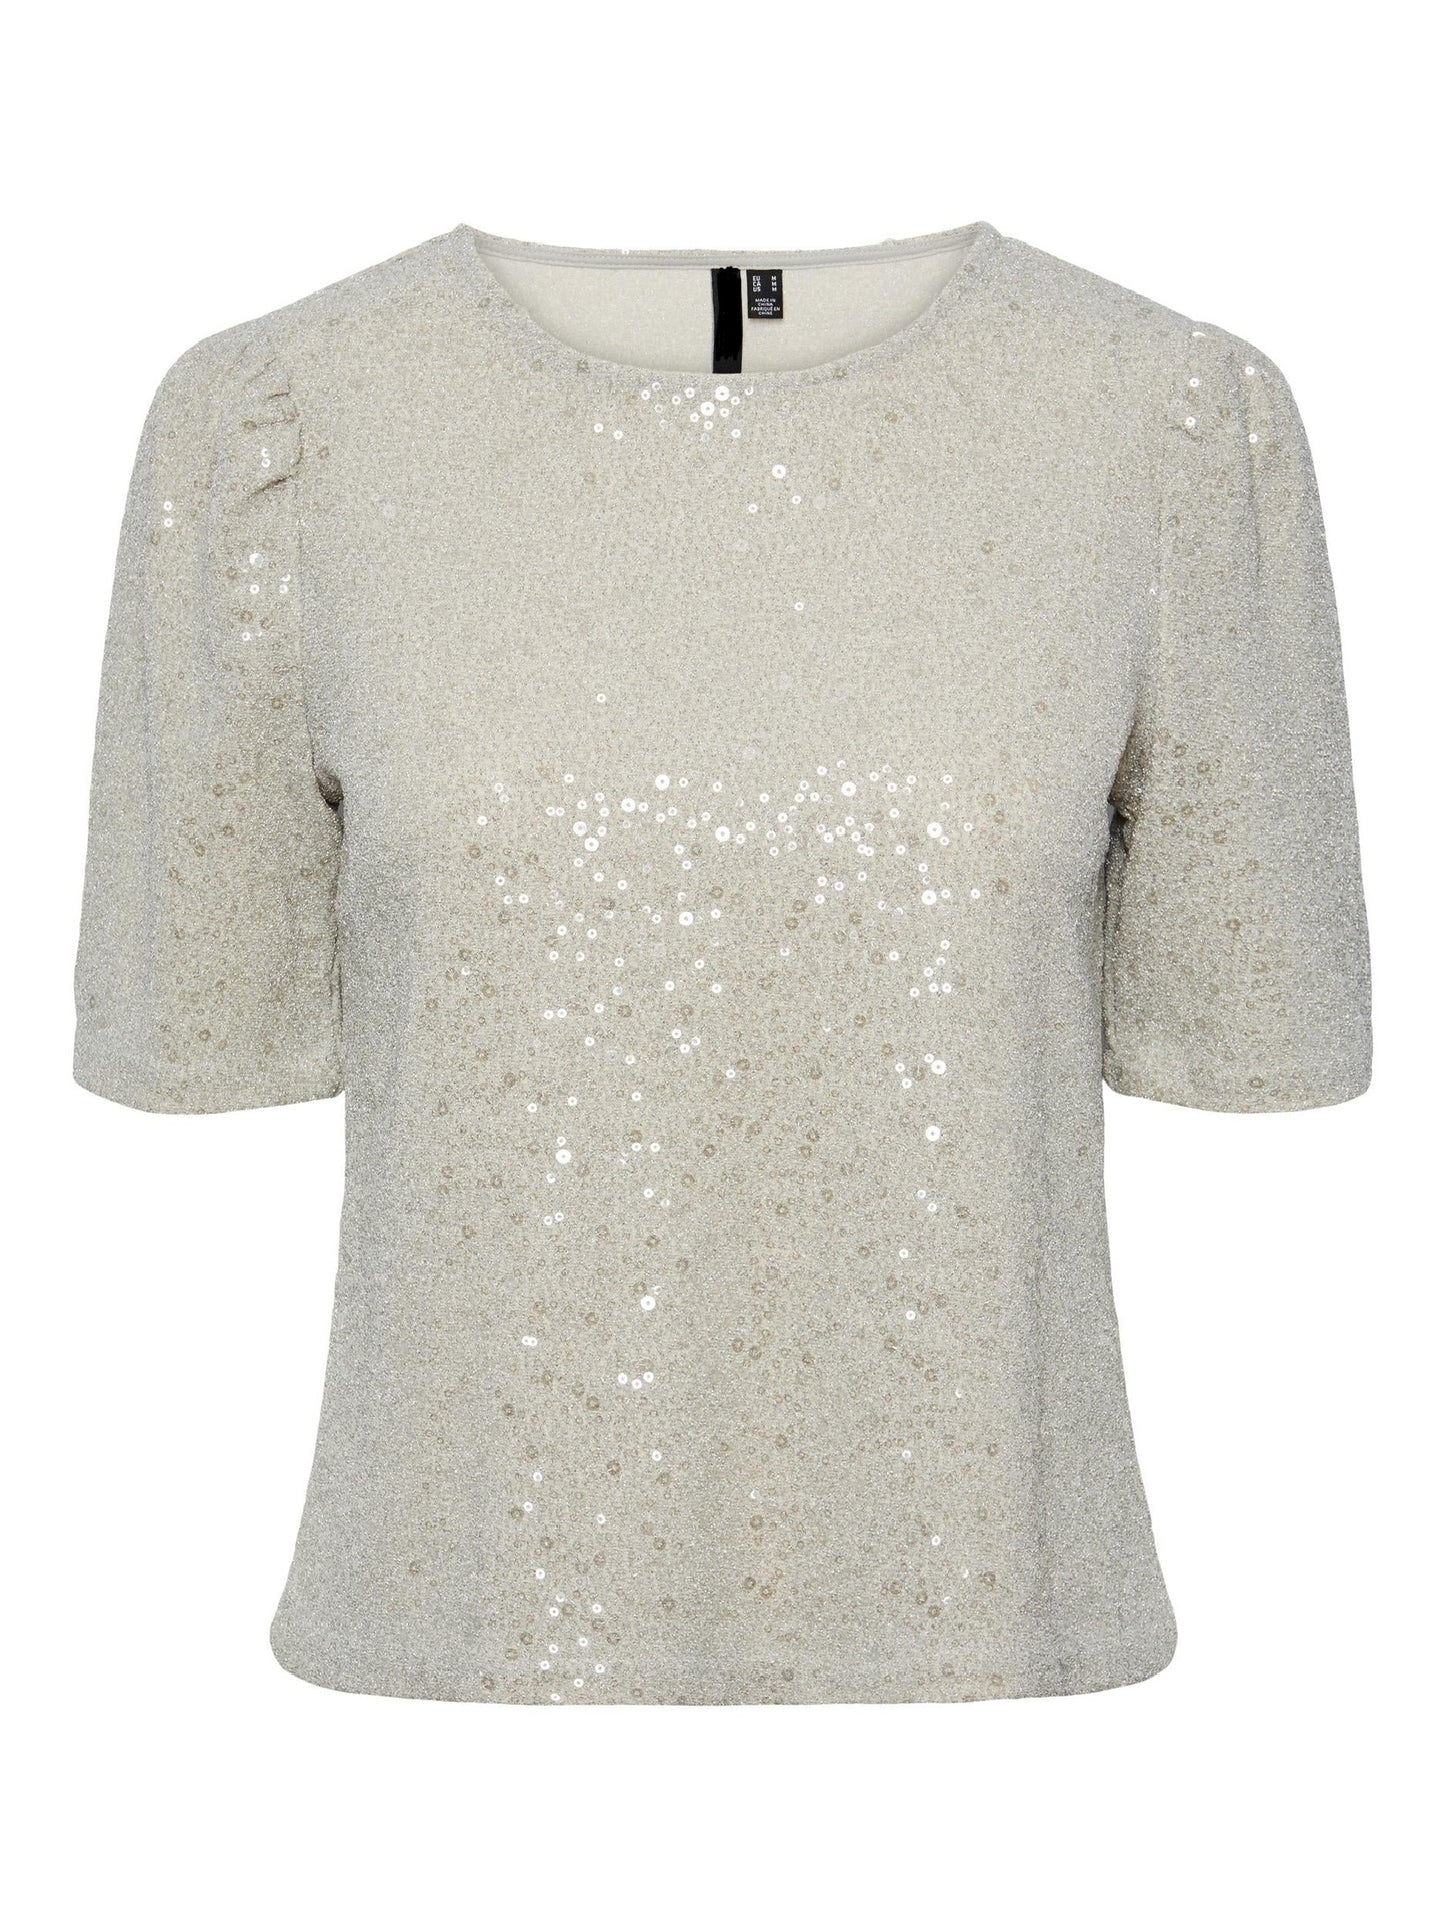 Champagne sequin top